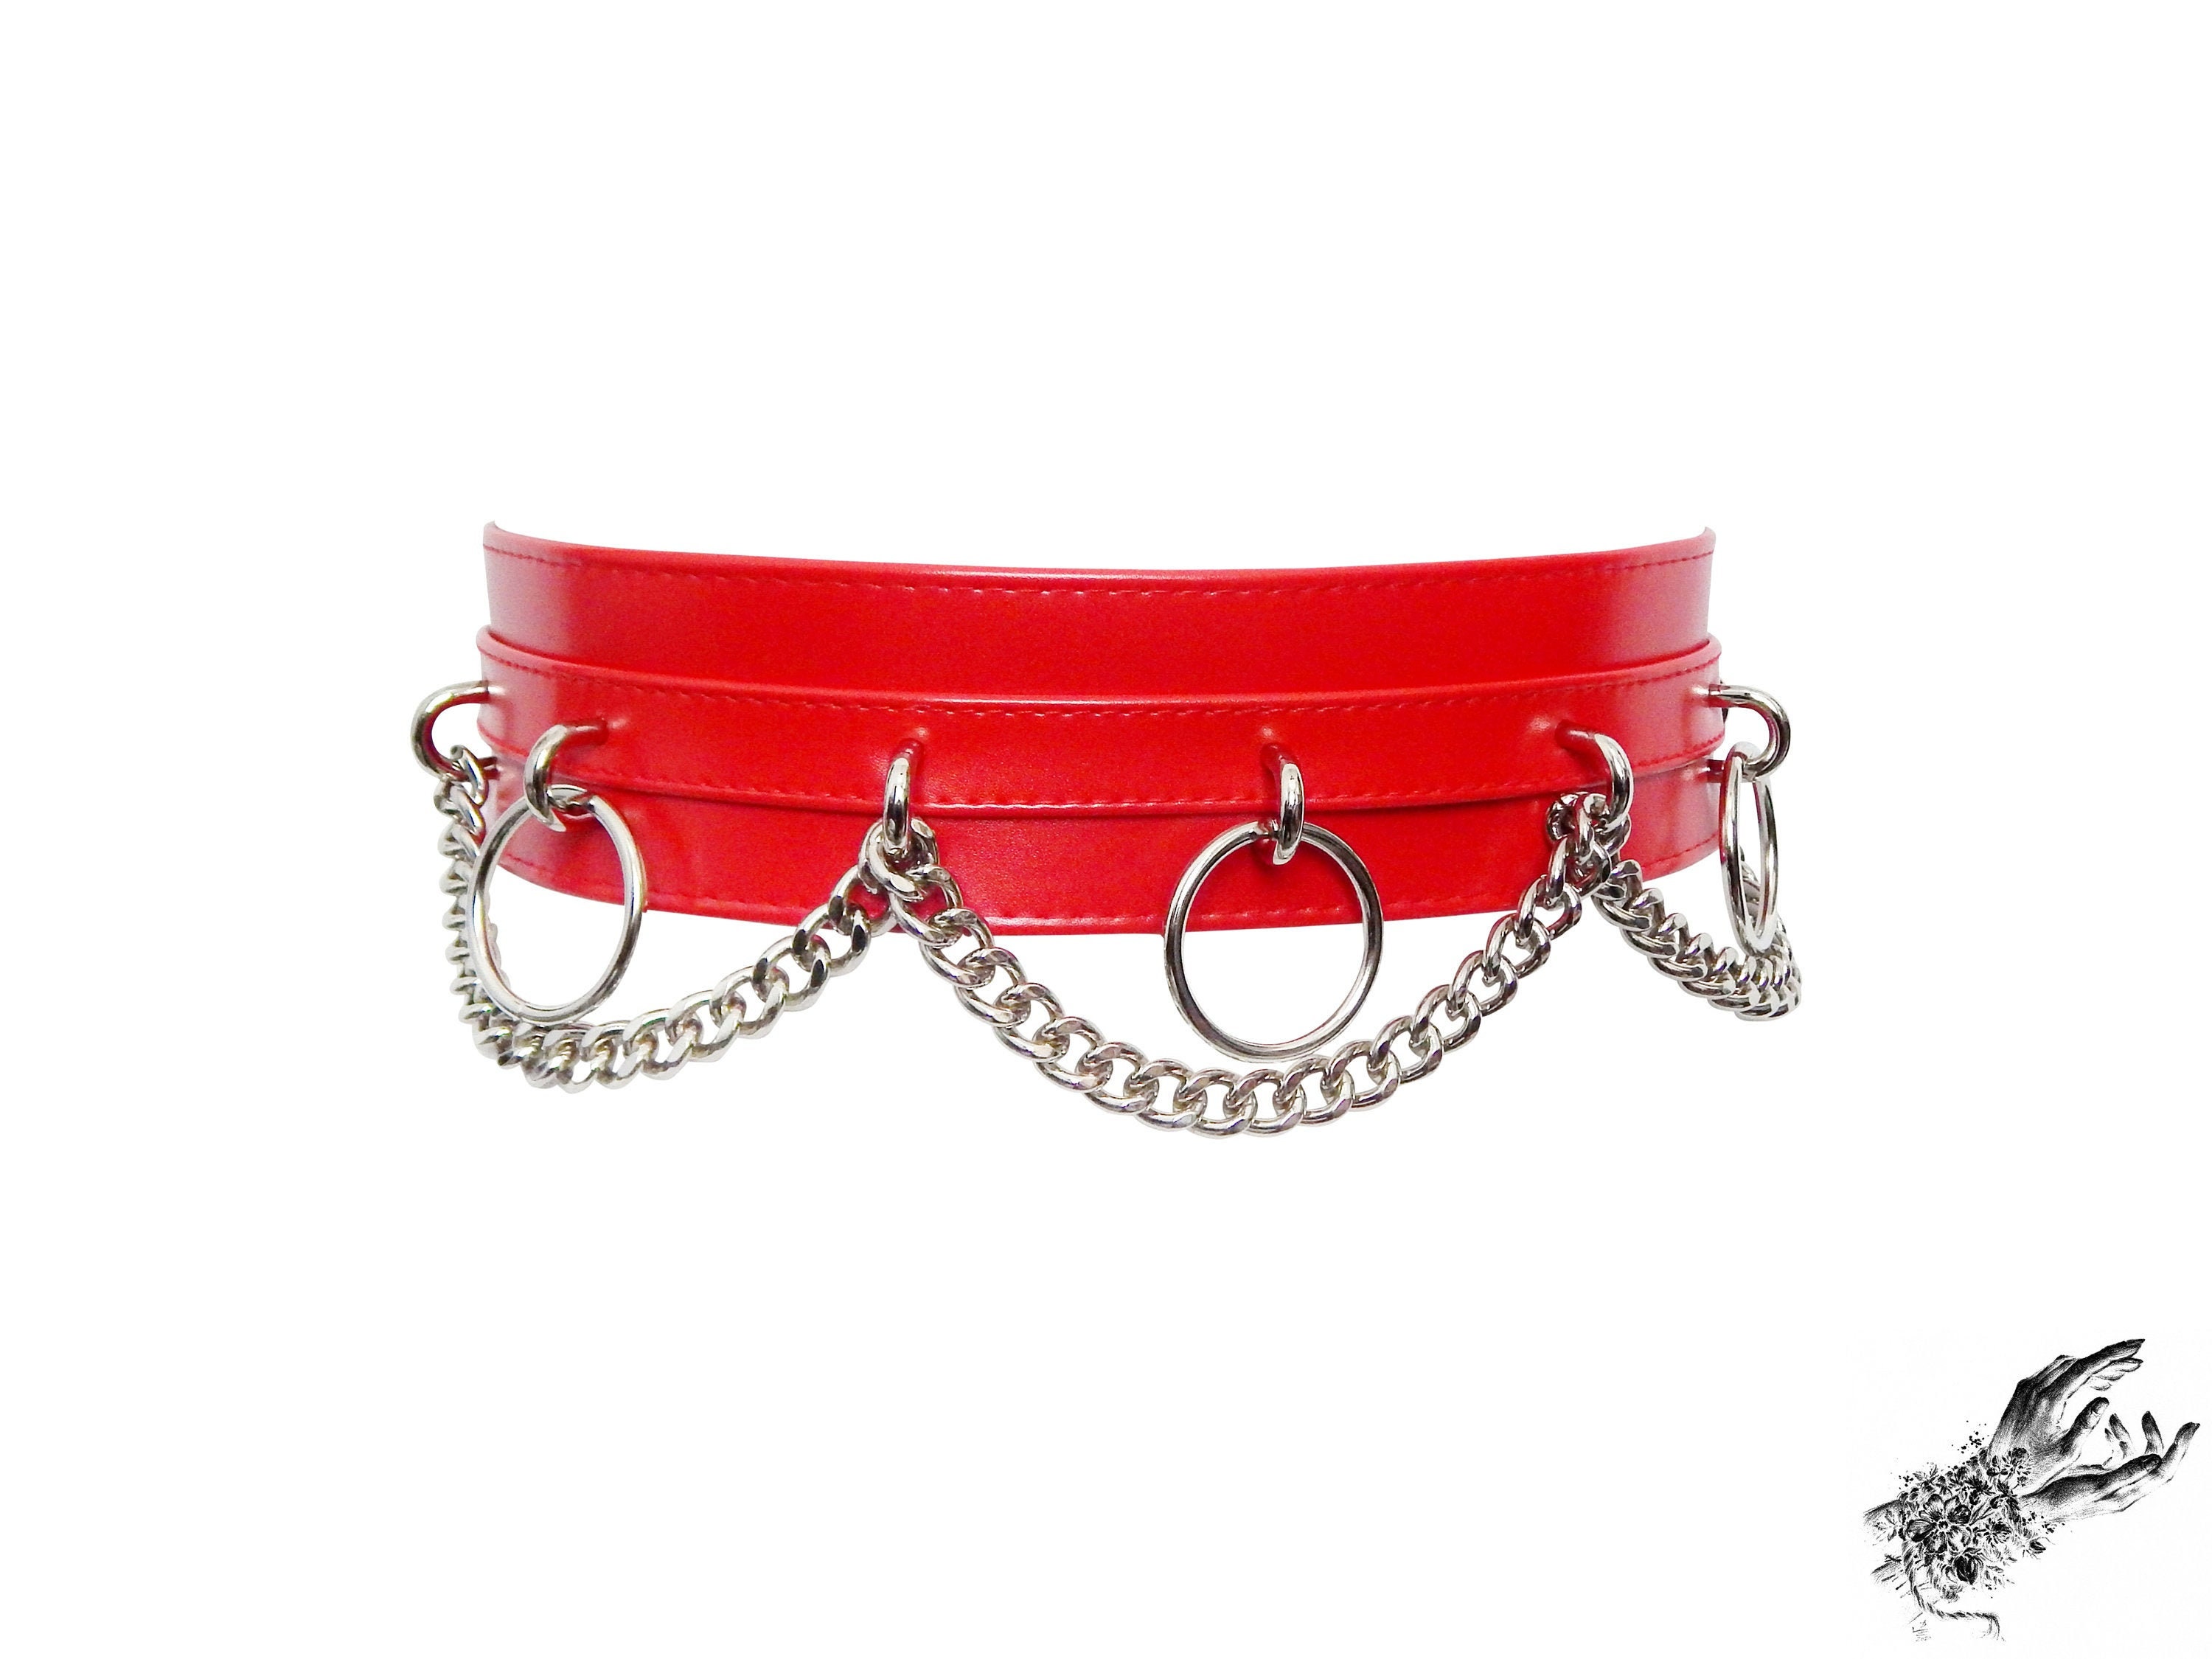 SALE - Red Vegan Leather O Ring and Chain Belt, Red Vegan Leather Belt, Chunky Chain Belt, Red O Ring Belt, Plus Size Belt, Red Faux Leather Belt photo